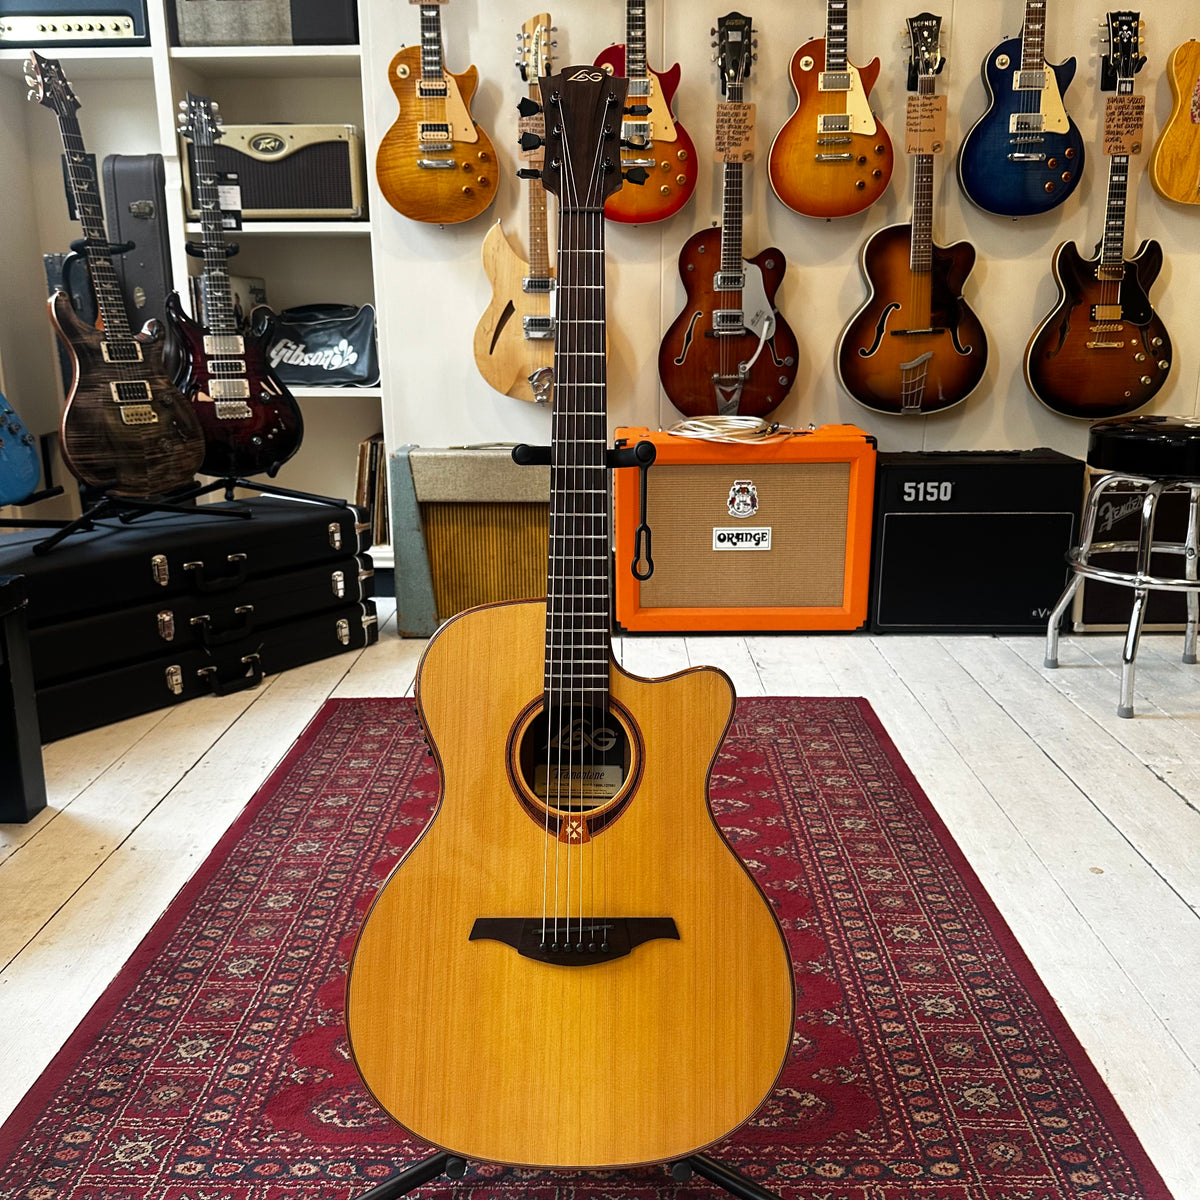 LAG Guitars Tramontane 118 T118ACE Natural Electro-Acoustic Guitar - Preowned